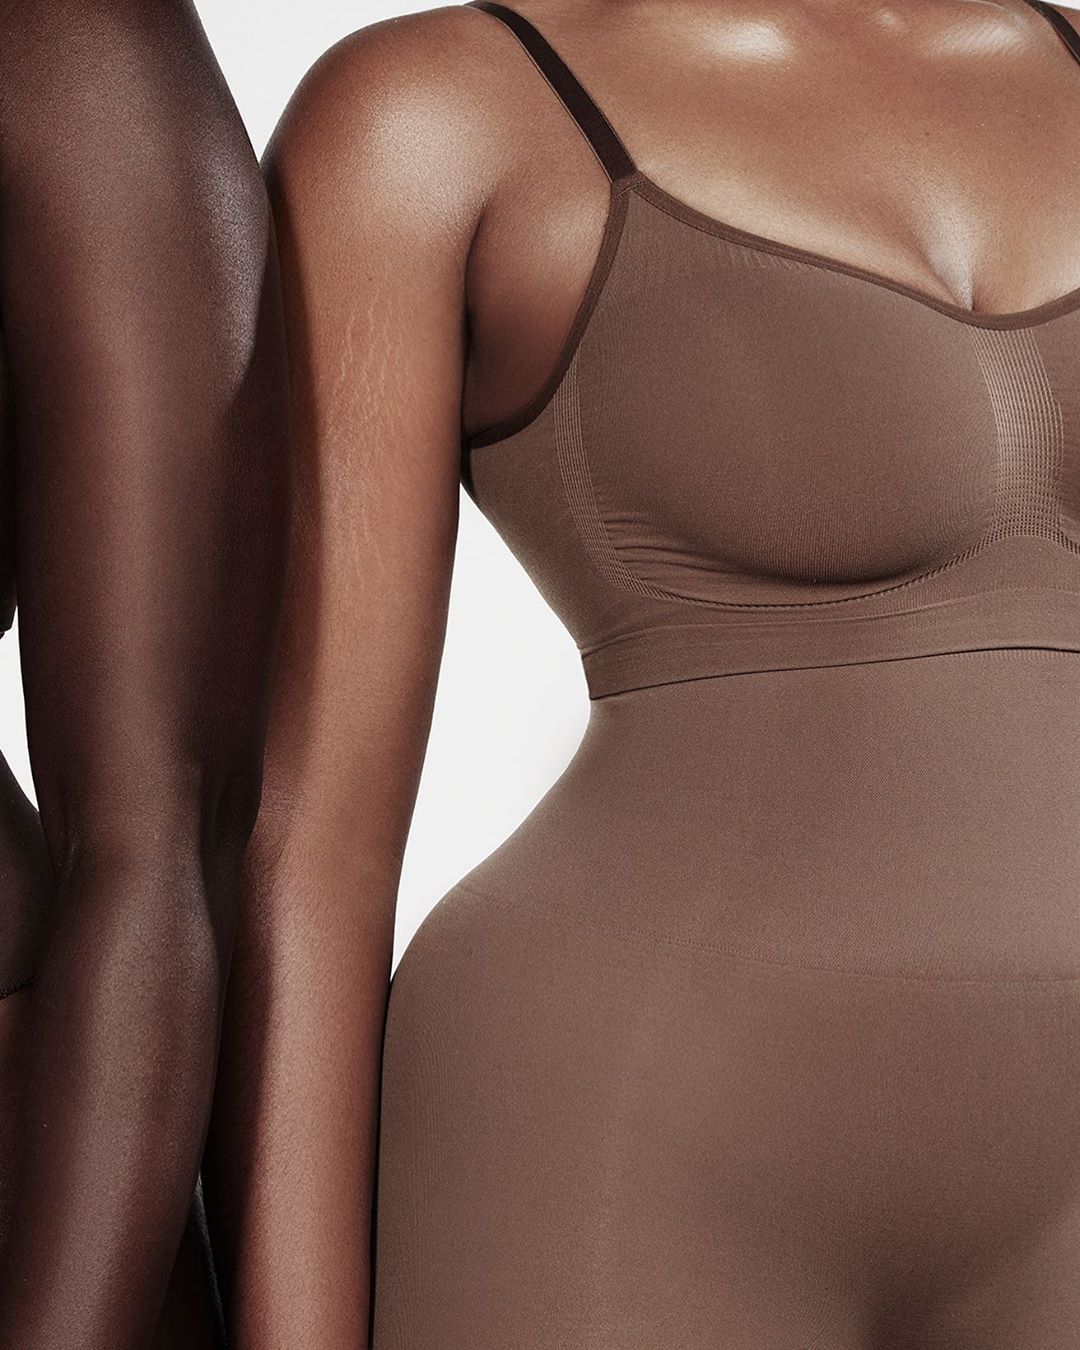 SKIMS on X: The Sculpting Bra ($32 in sizes XXS-5XL) and the Core